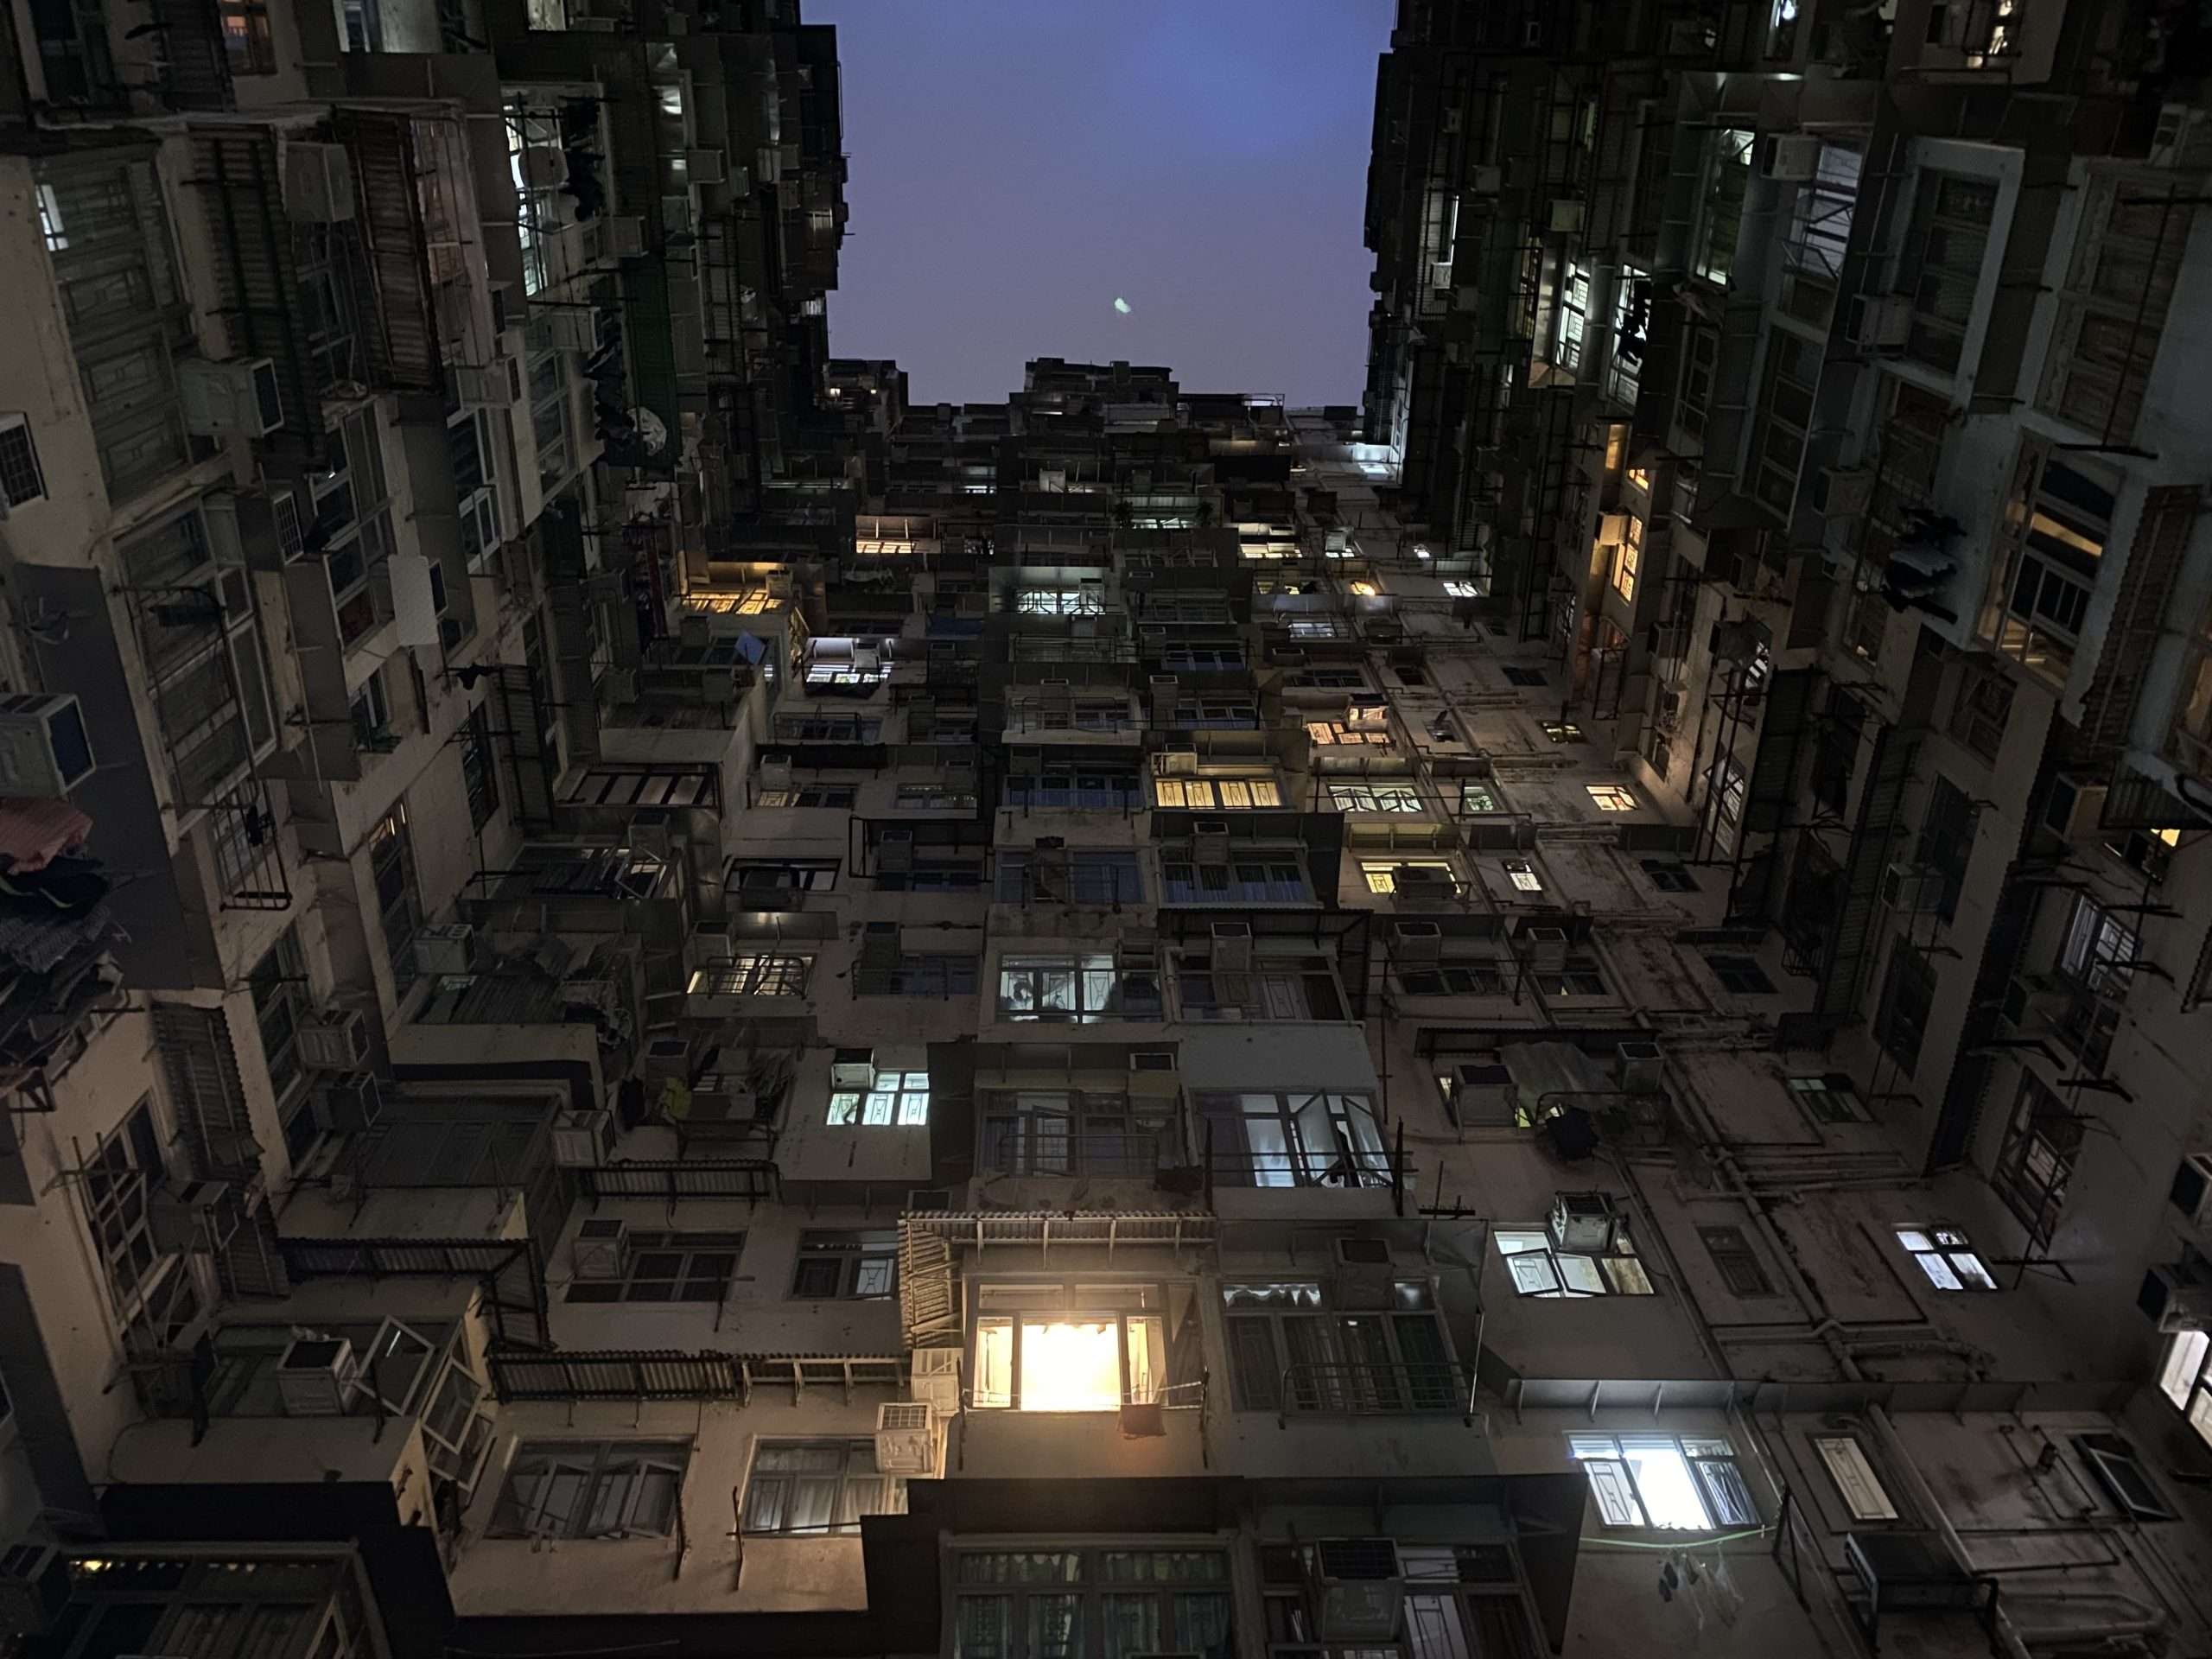 Photograph of towering apartment buildings used in the final animation piece.